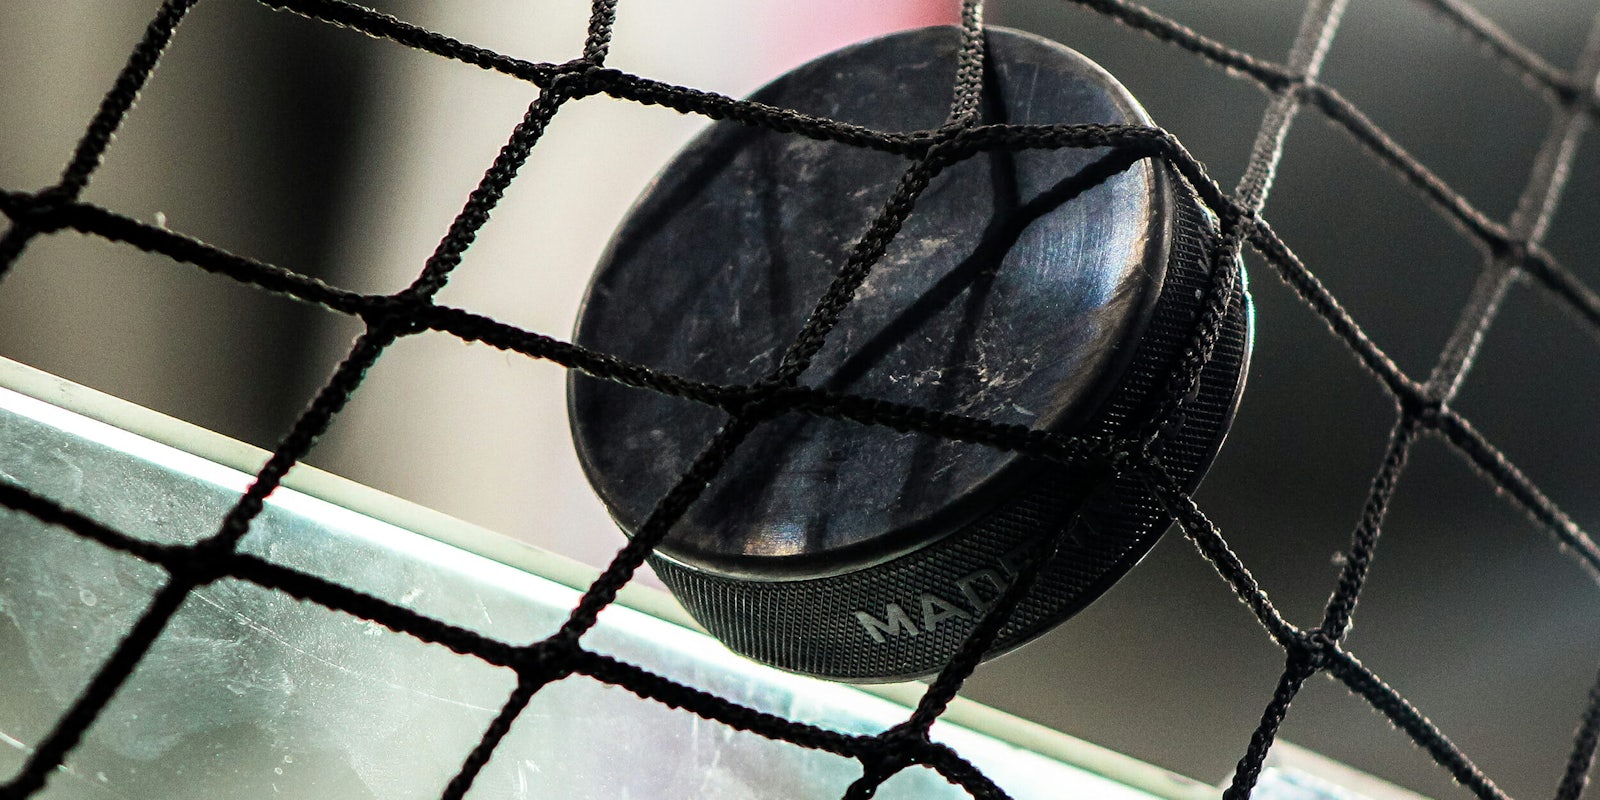 how to watch NHL games tonight on TV - NHL hockey puck in the net